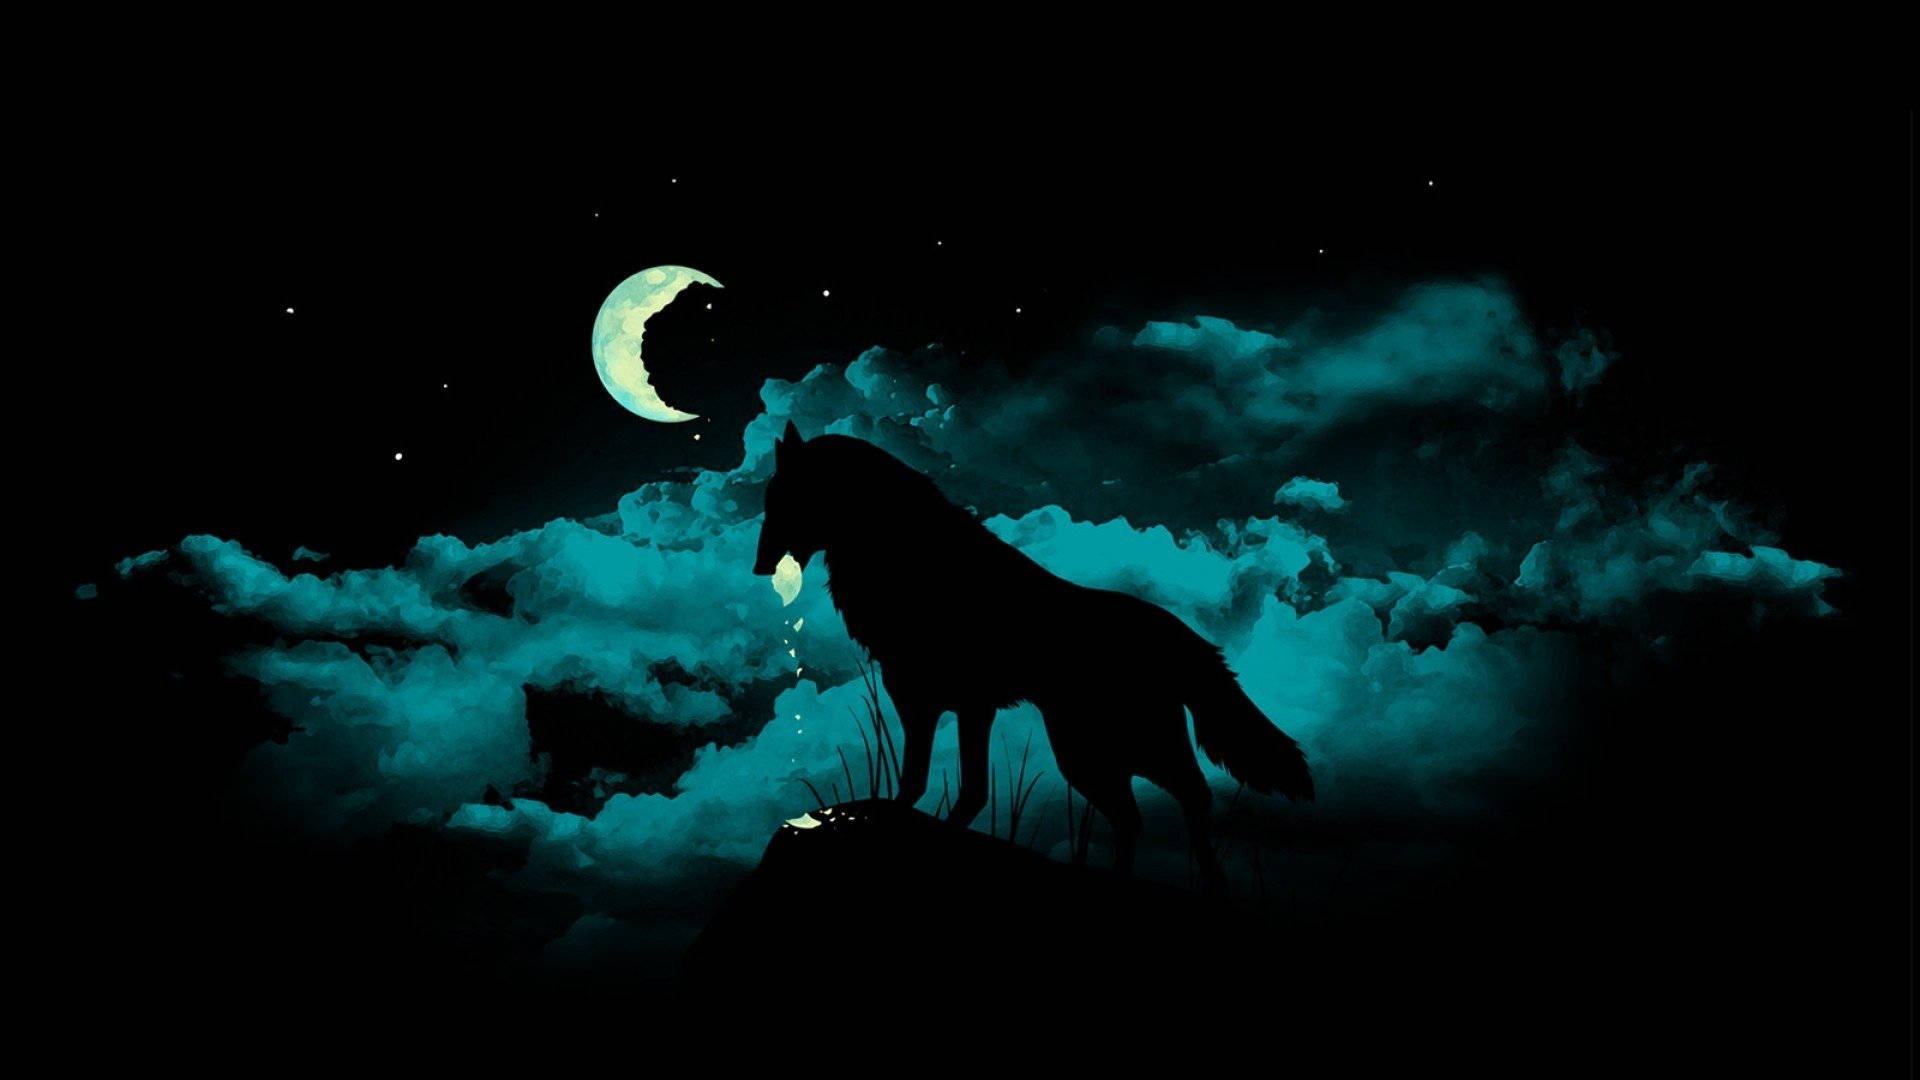 Caption: Dark Laptop with Enthralling Wolf Wallpaper at Night Wallpaper